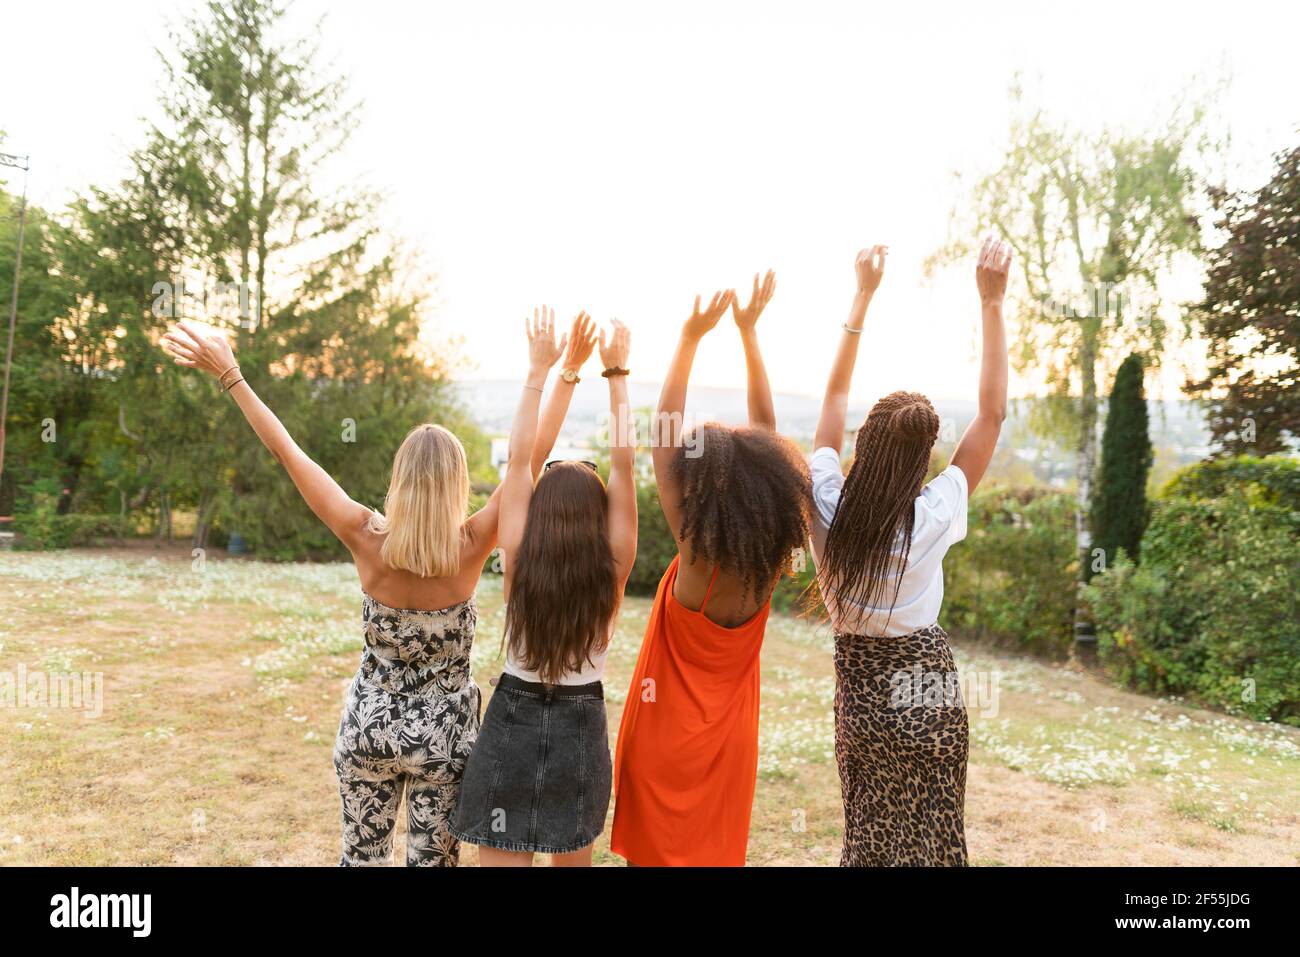 Multi-ethnic female friends standing with hands raised in park Stock Photo